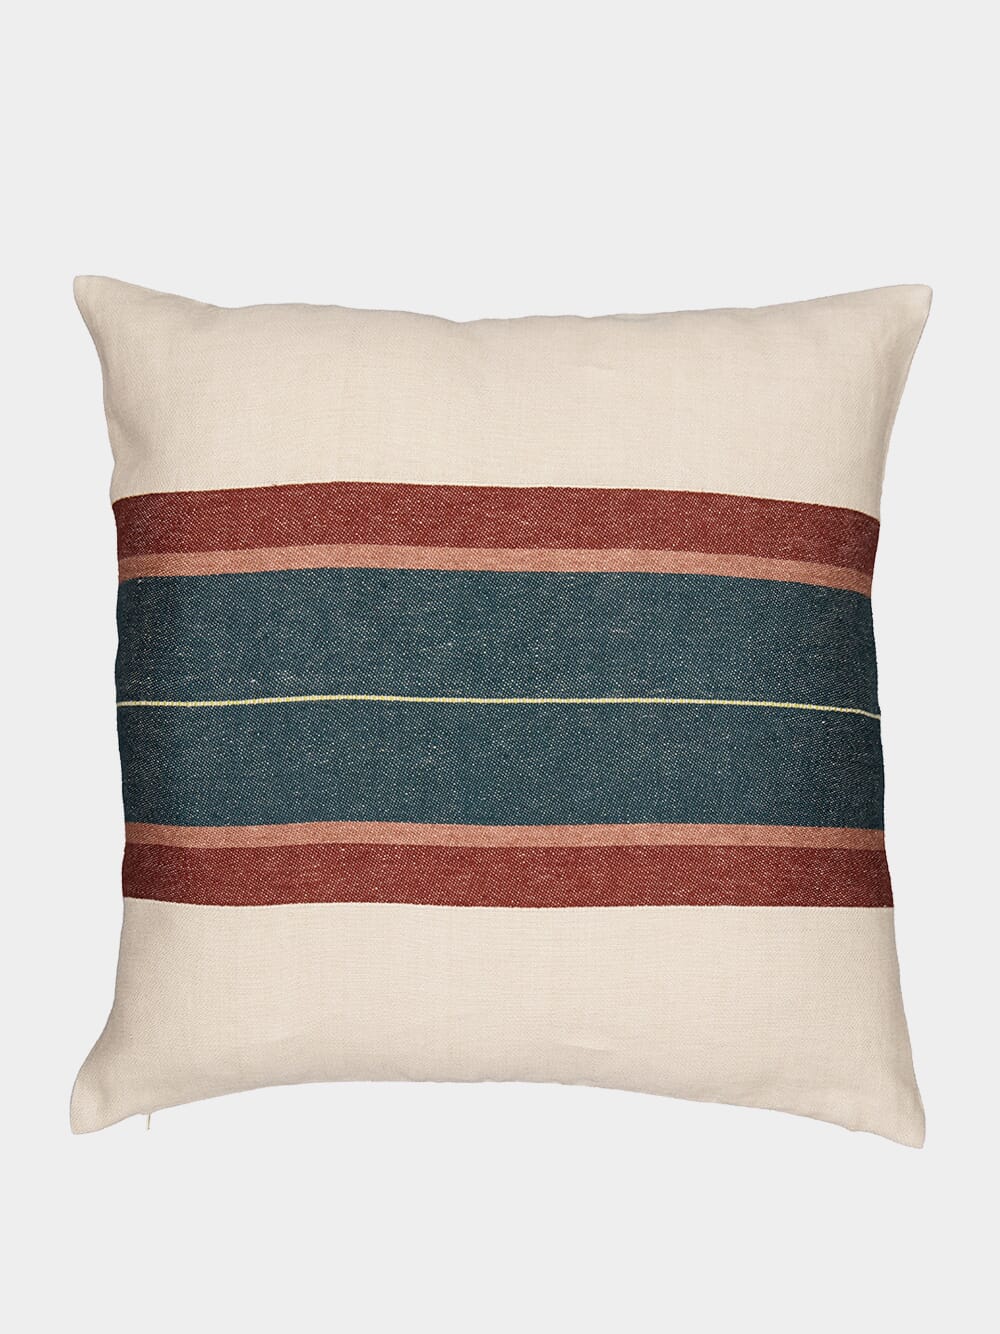 LibecoLYS Linen Pillow at Fashion Clinic